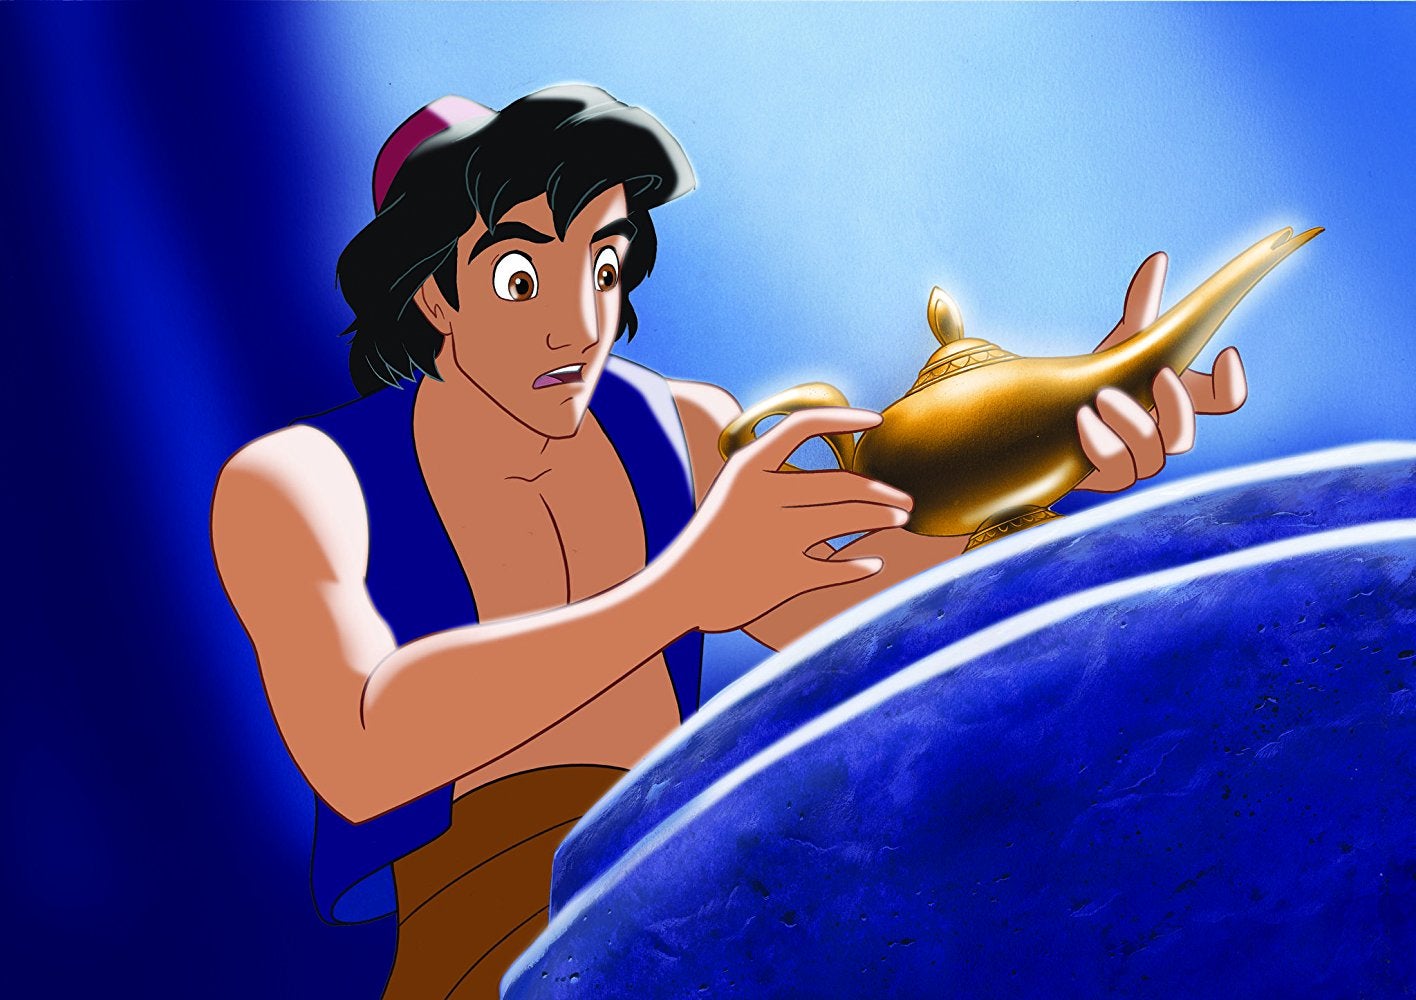 The Quick Read: White Actors Are Allegedly Being Tanned For Disney's Live-Action 'Aladdin'
